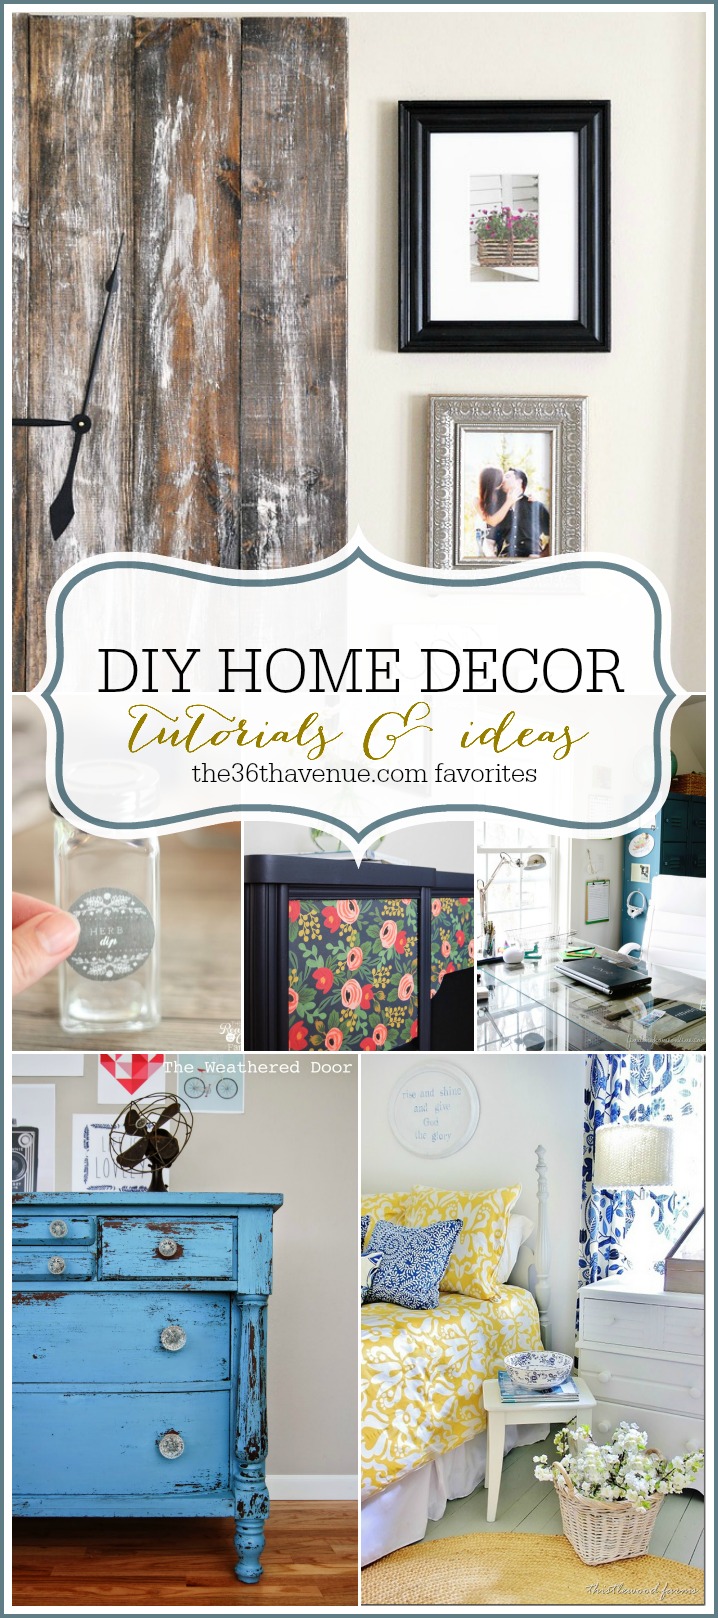 DIY Home Decor Projects and Ideas at the36thavenue.com